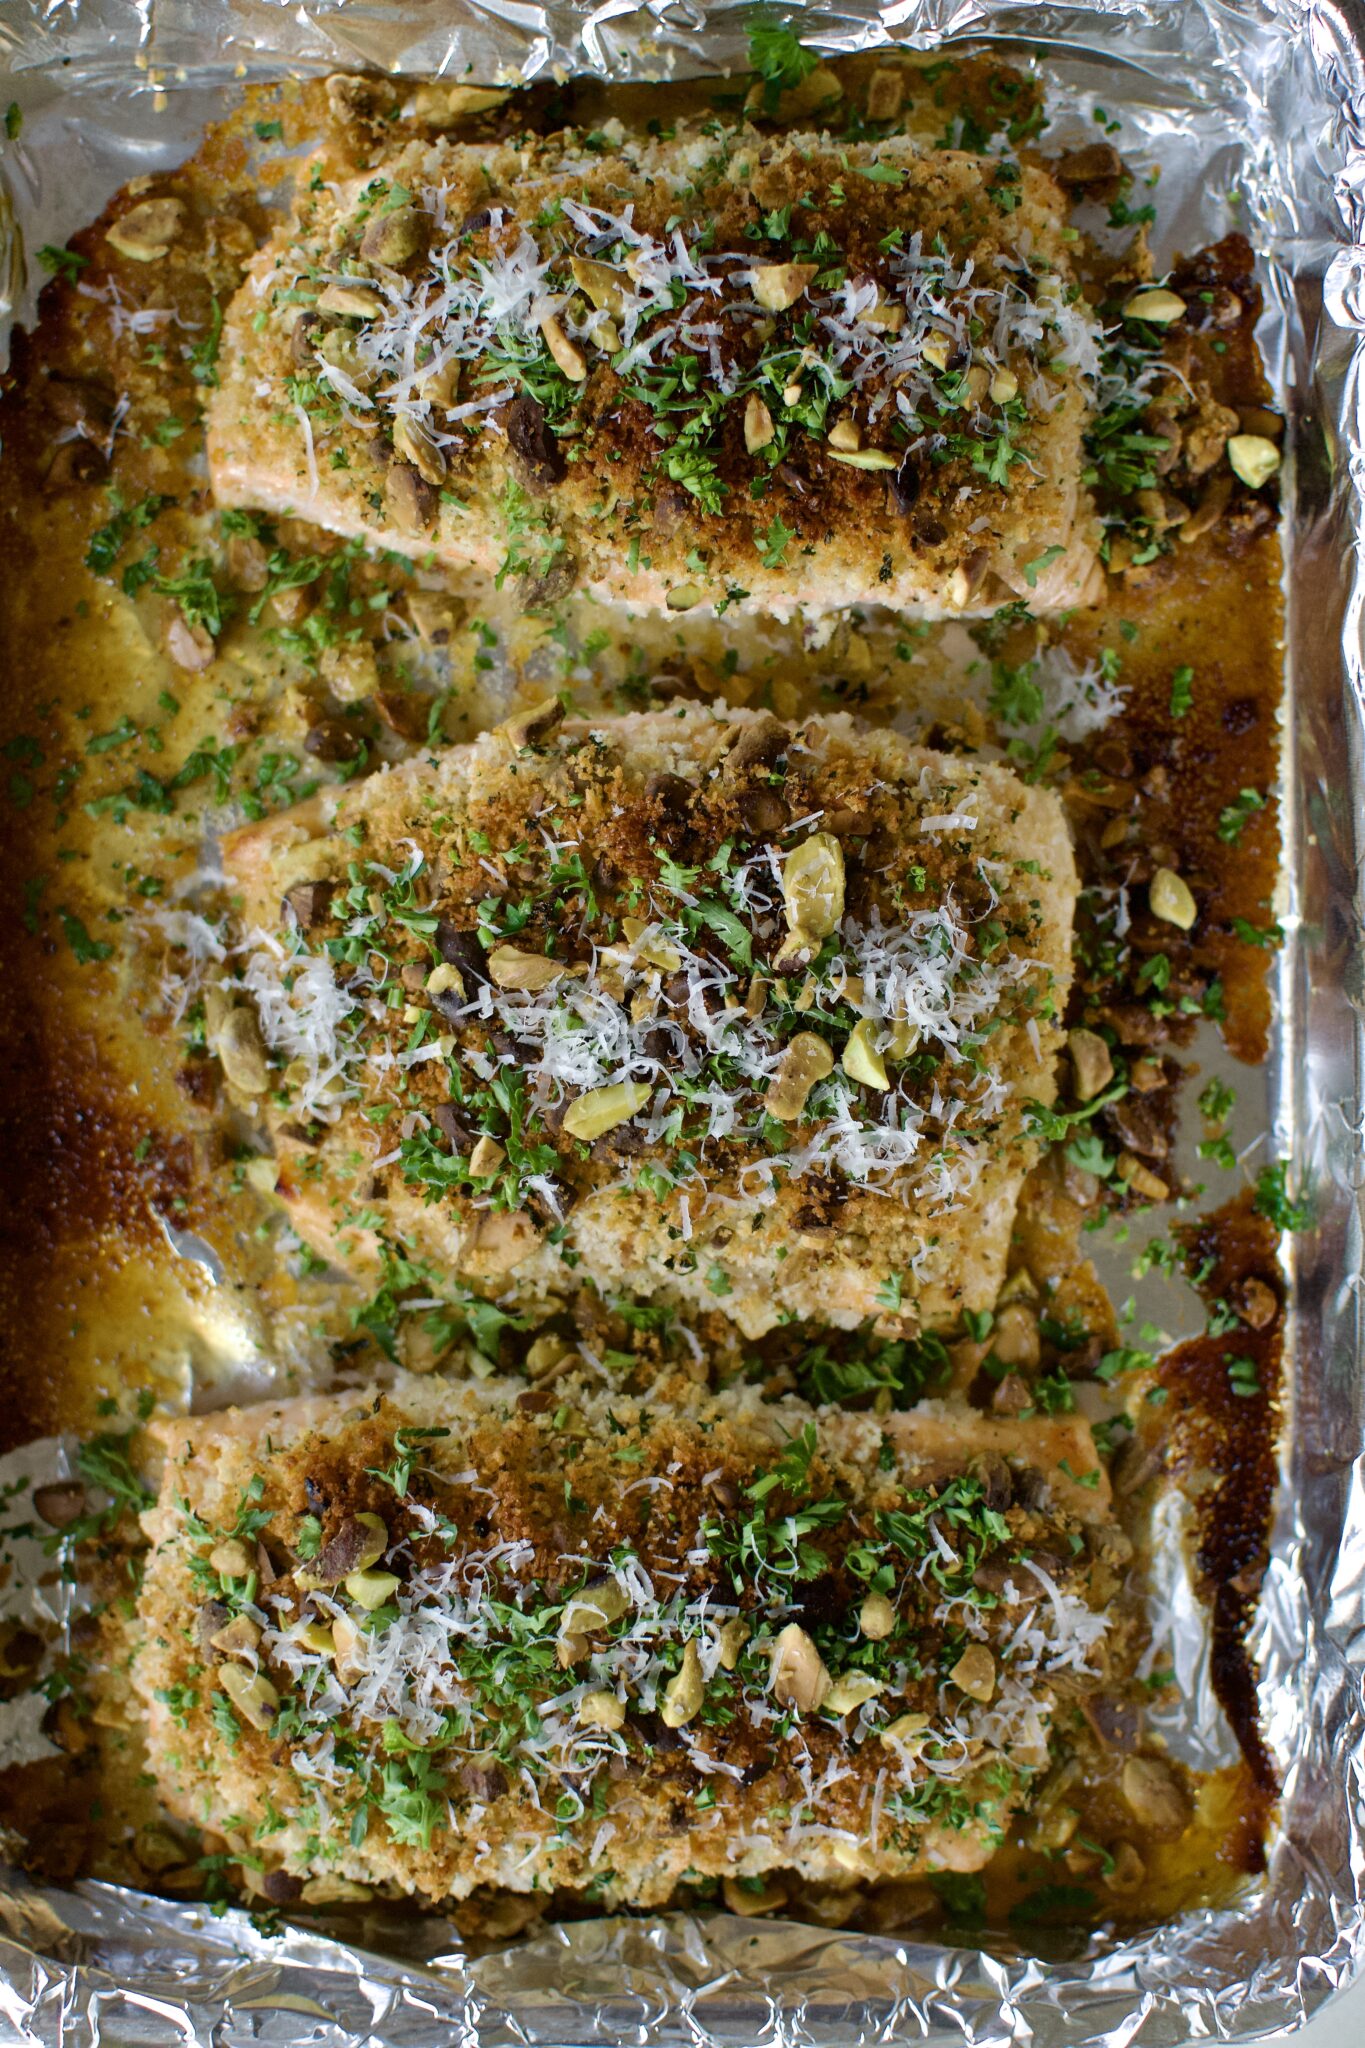 Pistachio Crusted Salmon fresh out of the oven, topped with parsley and parmesan.